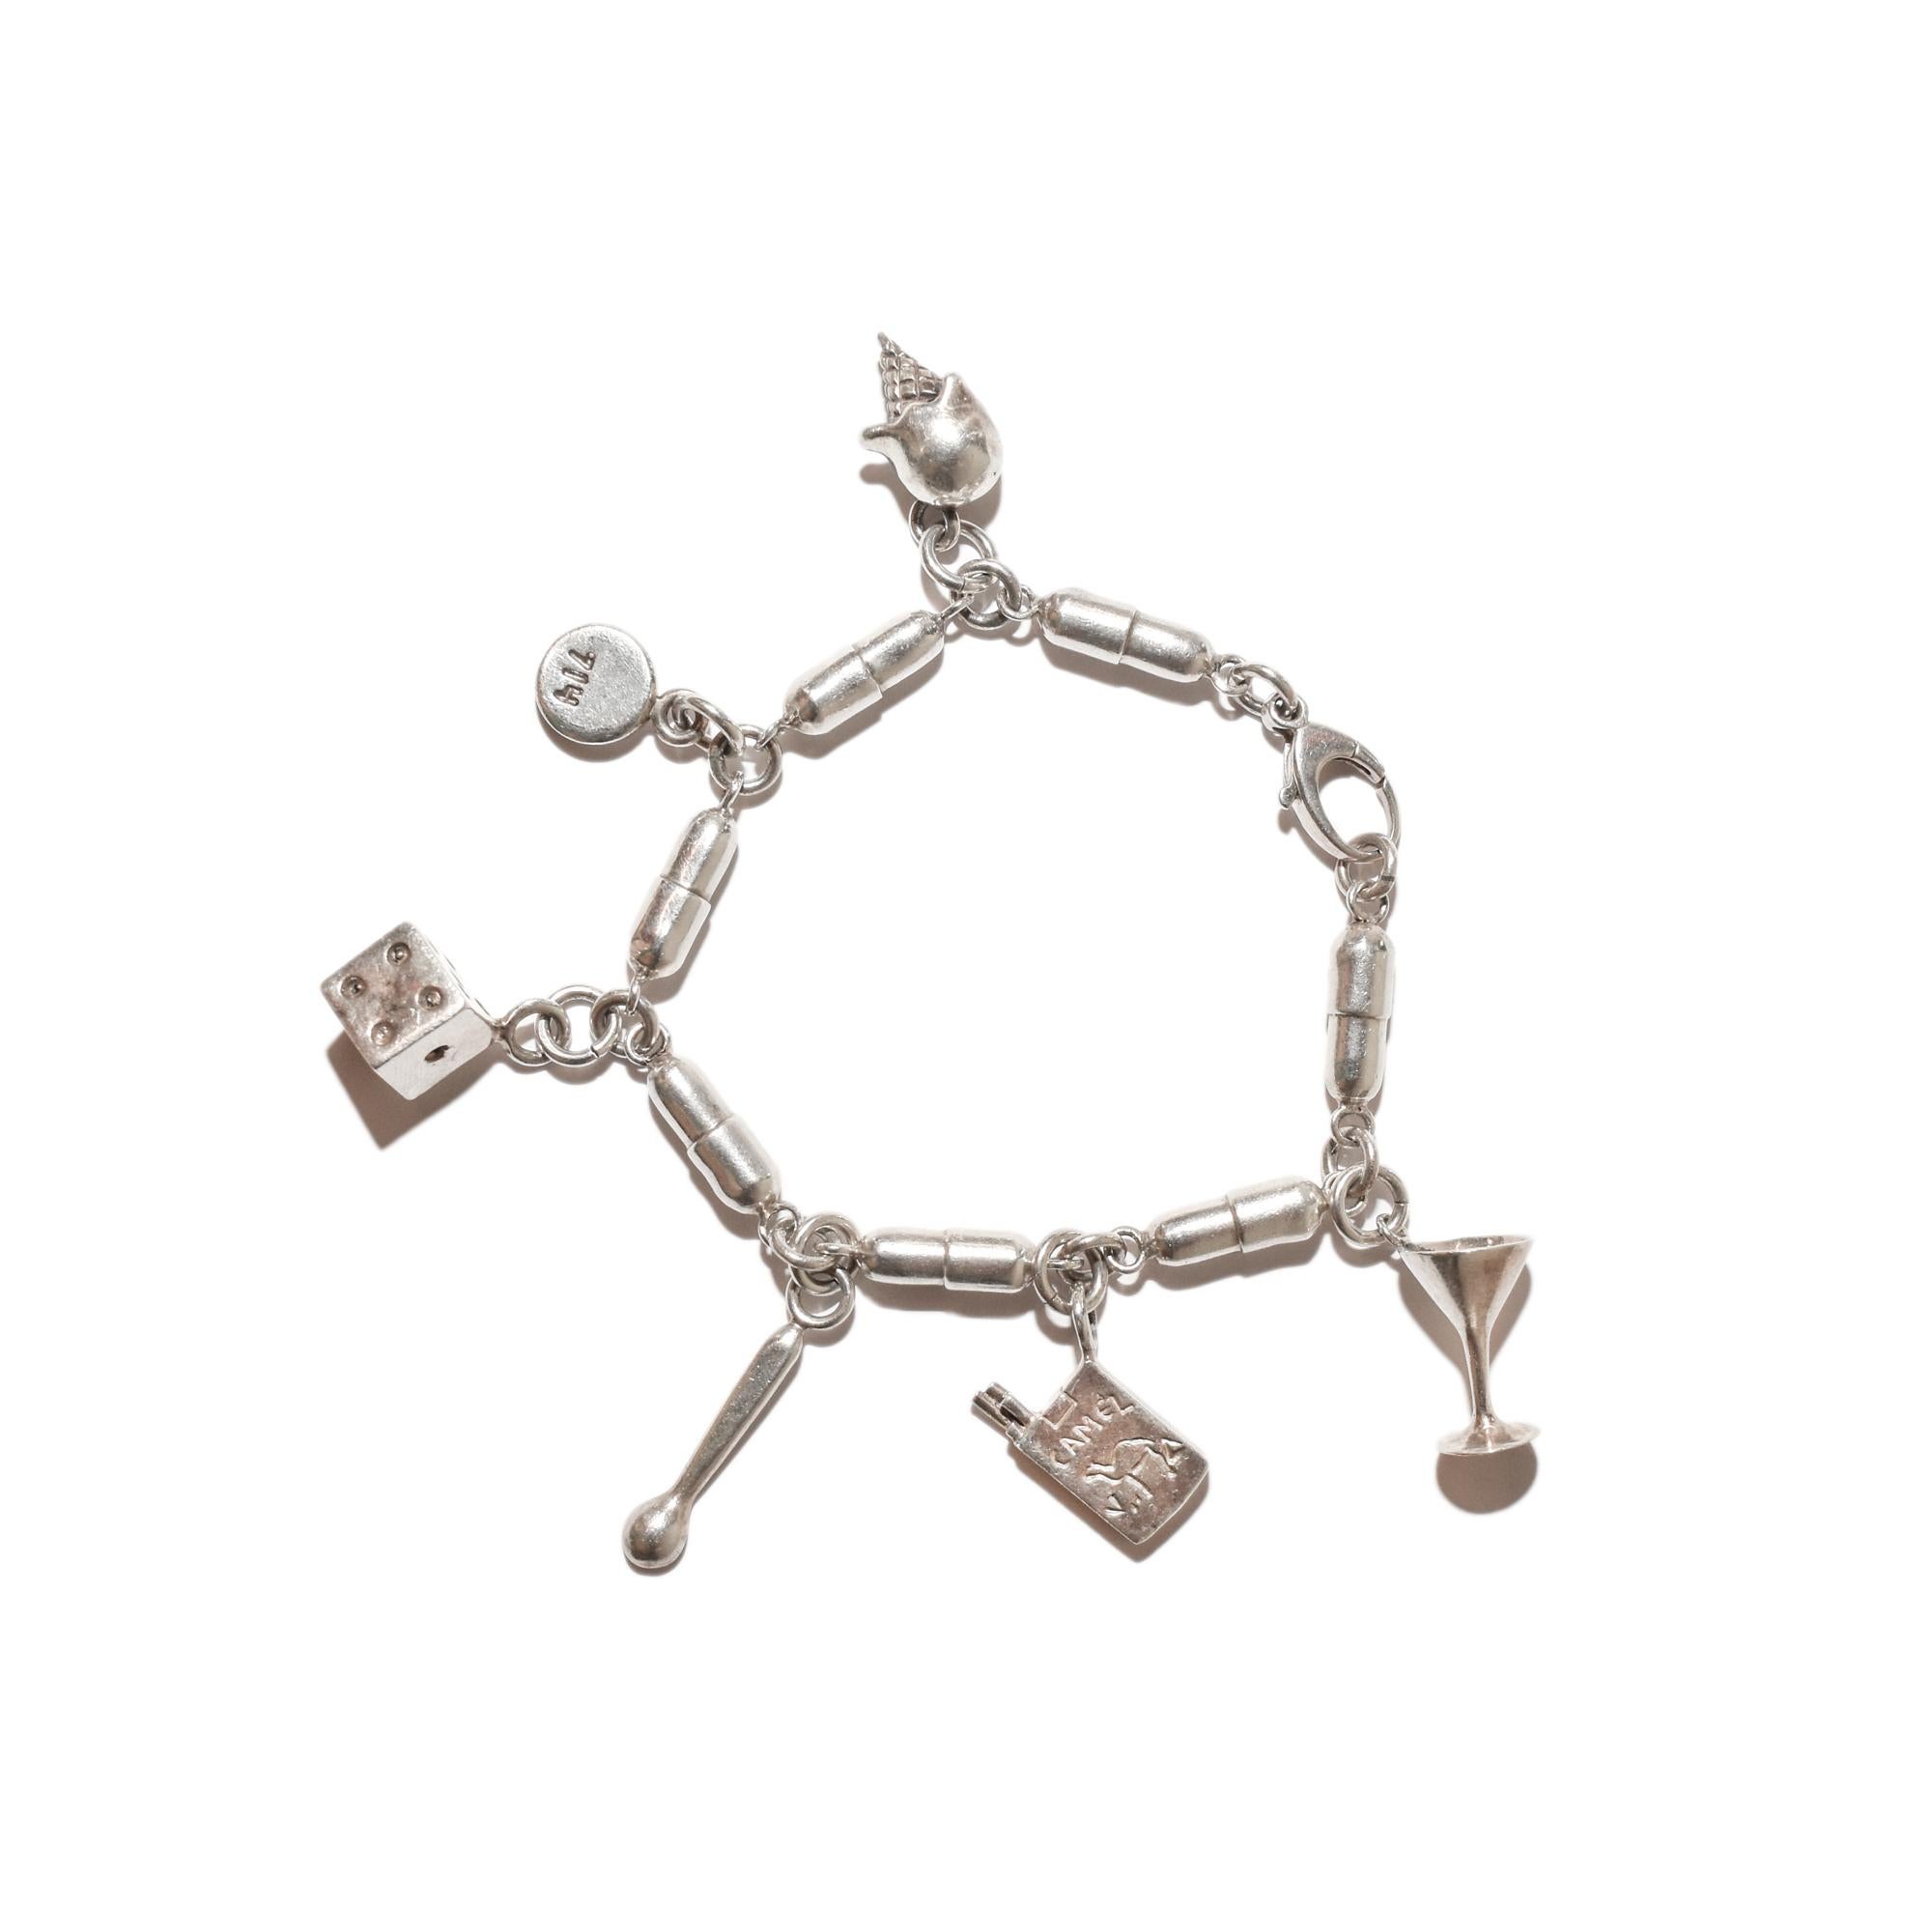 An extraordinary Damien Hirst style sterling silver pill link 'VICES' charm bracelet. Features a pill capsule shaped link design with six vice-related charms: a martini glass, a pack of camel cigarettes, a coke spoon, a die, a Quaalude pill, and an